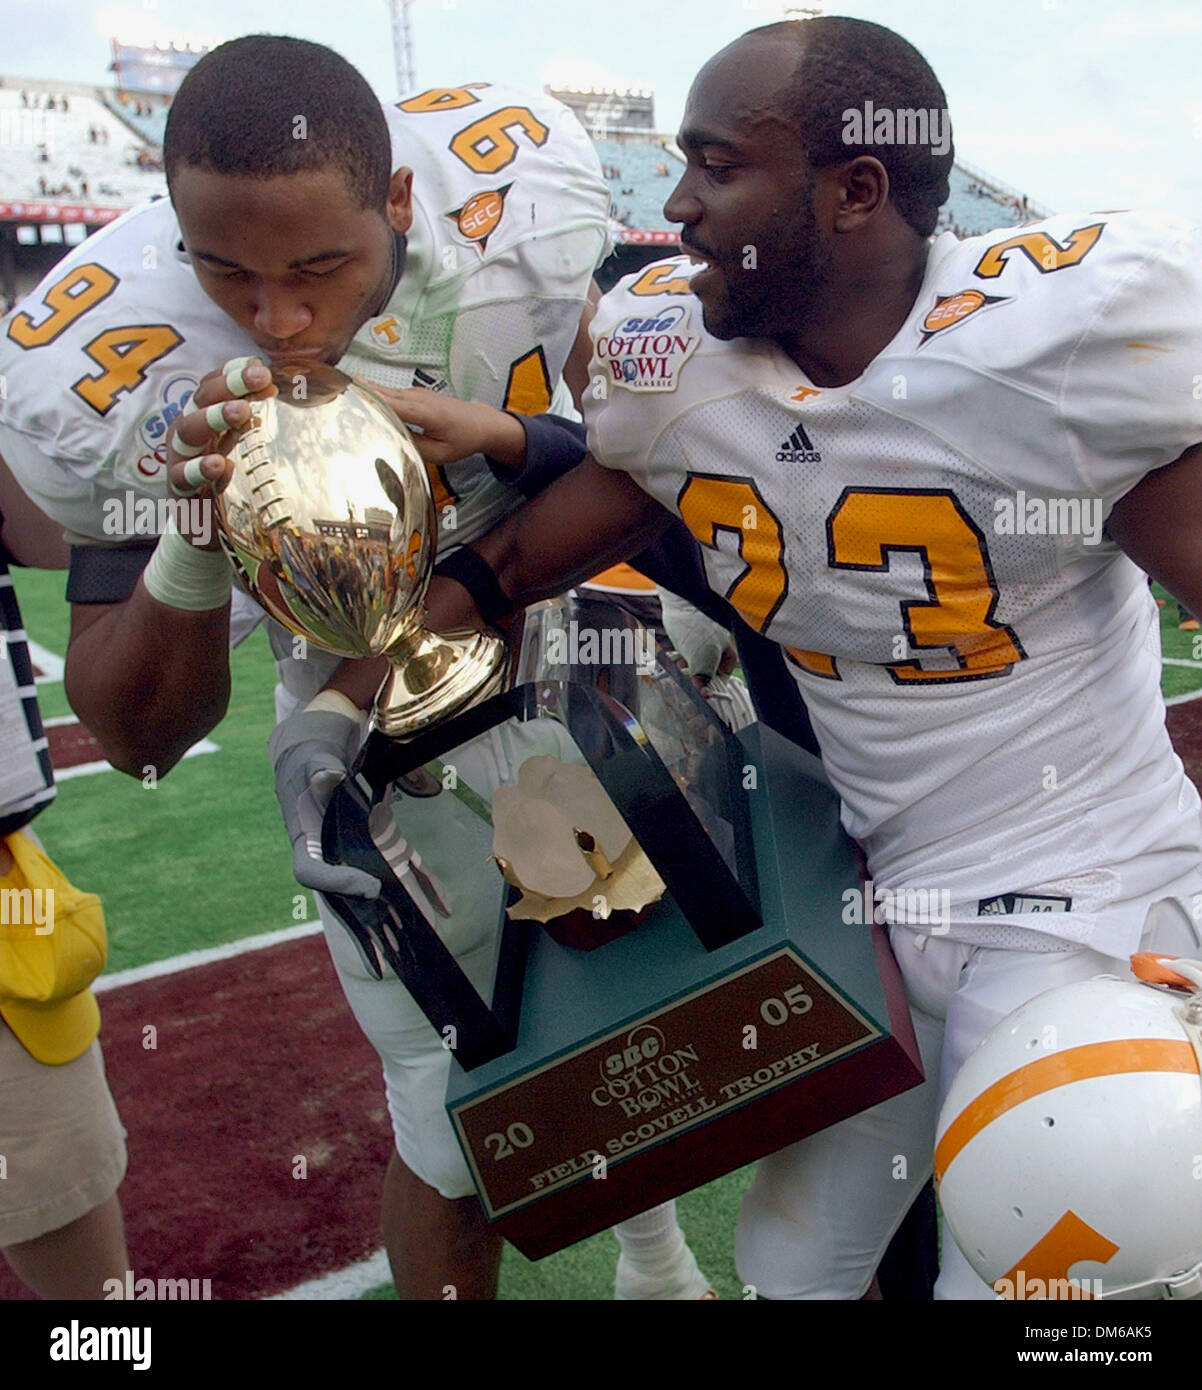 Jan 01, 2005; Dallas, TX, USA; NCAA College Basketball - (Tennessee 38, Texas A&M 7)Tennessee's Jason Hall kisses the Field Scovell Trophy as teammate Corey Larkins holds it after defeating Texas A&M 38-7  at the Cotton Bowl in Dallas, Tx. Stock Photo